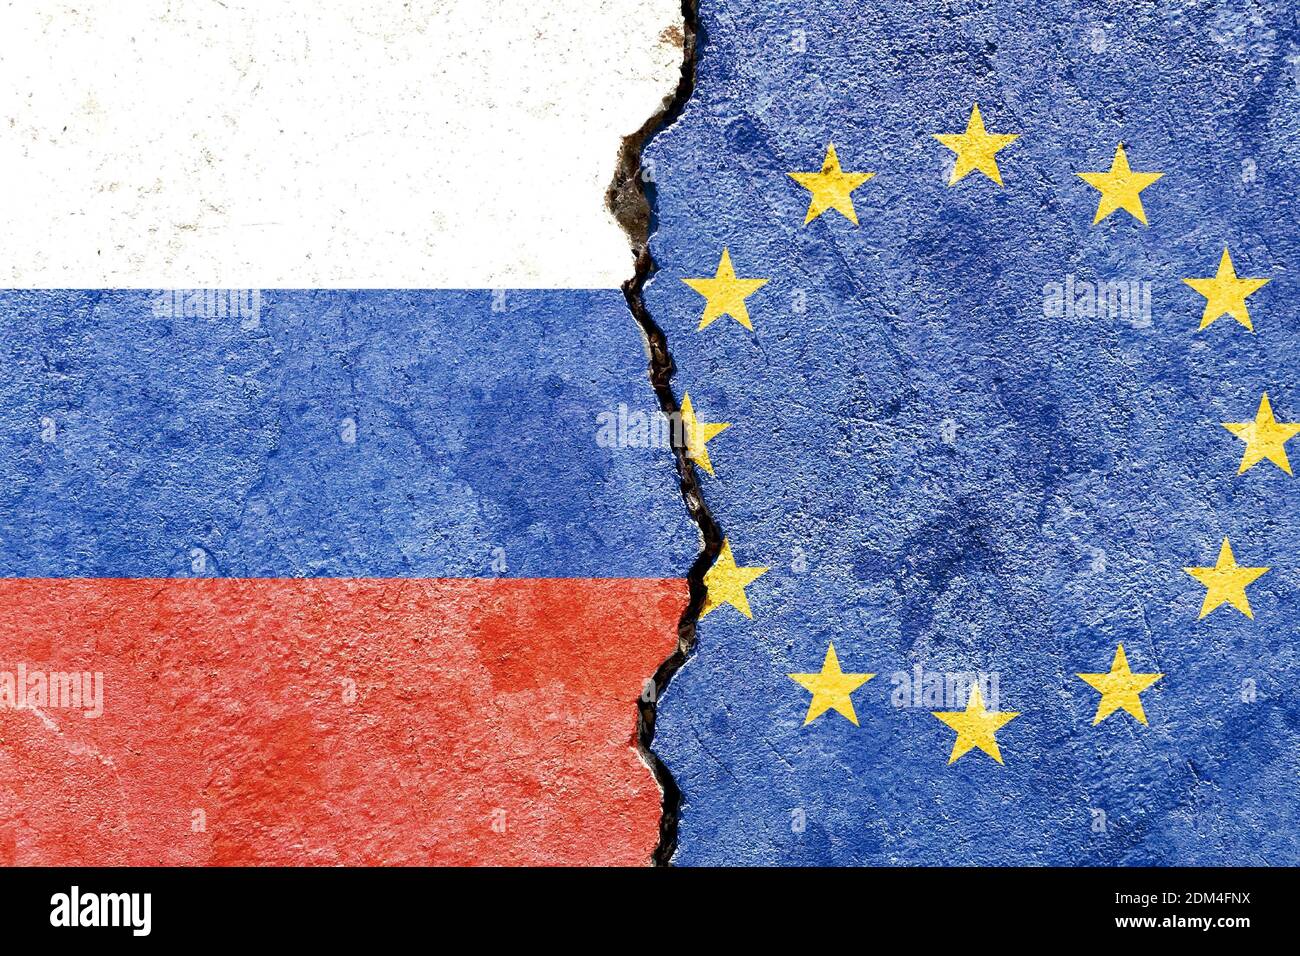 A Russian and EU flag on a cracked wall- politics, war, conflict concept Stock Photo